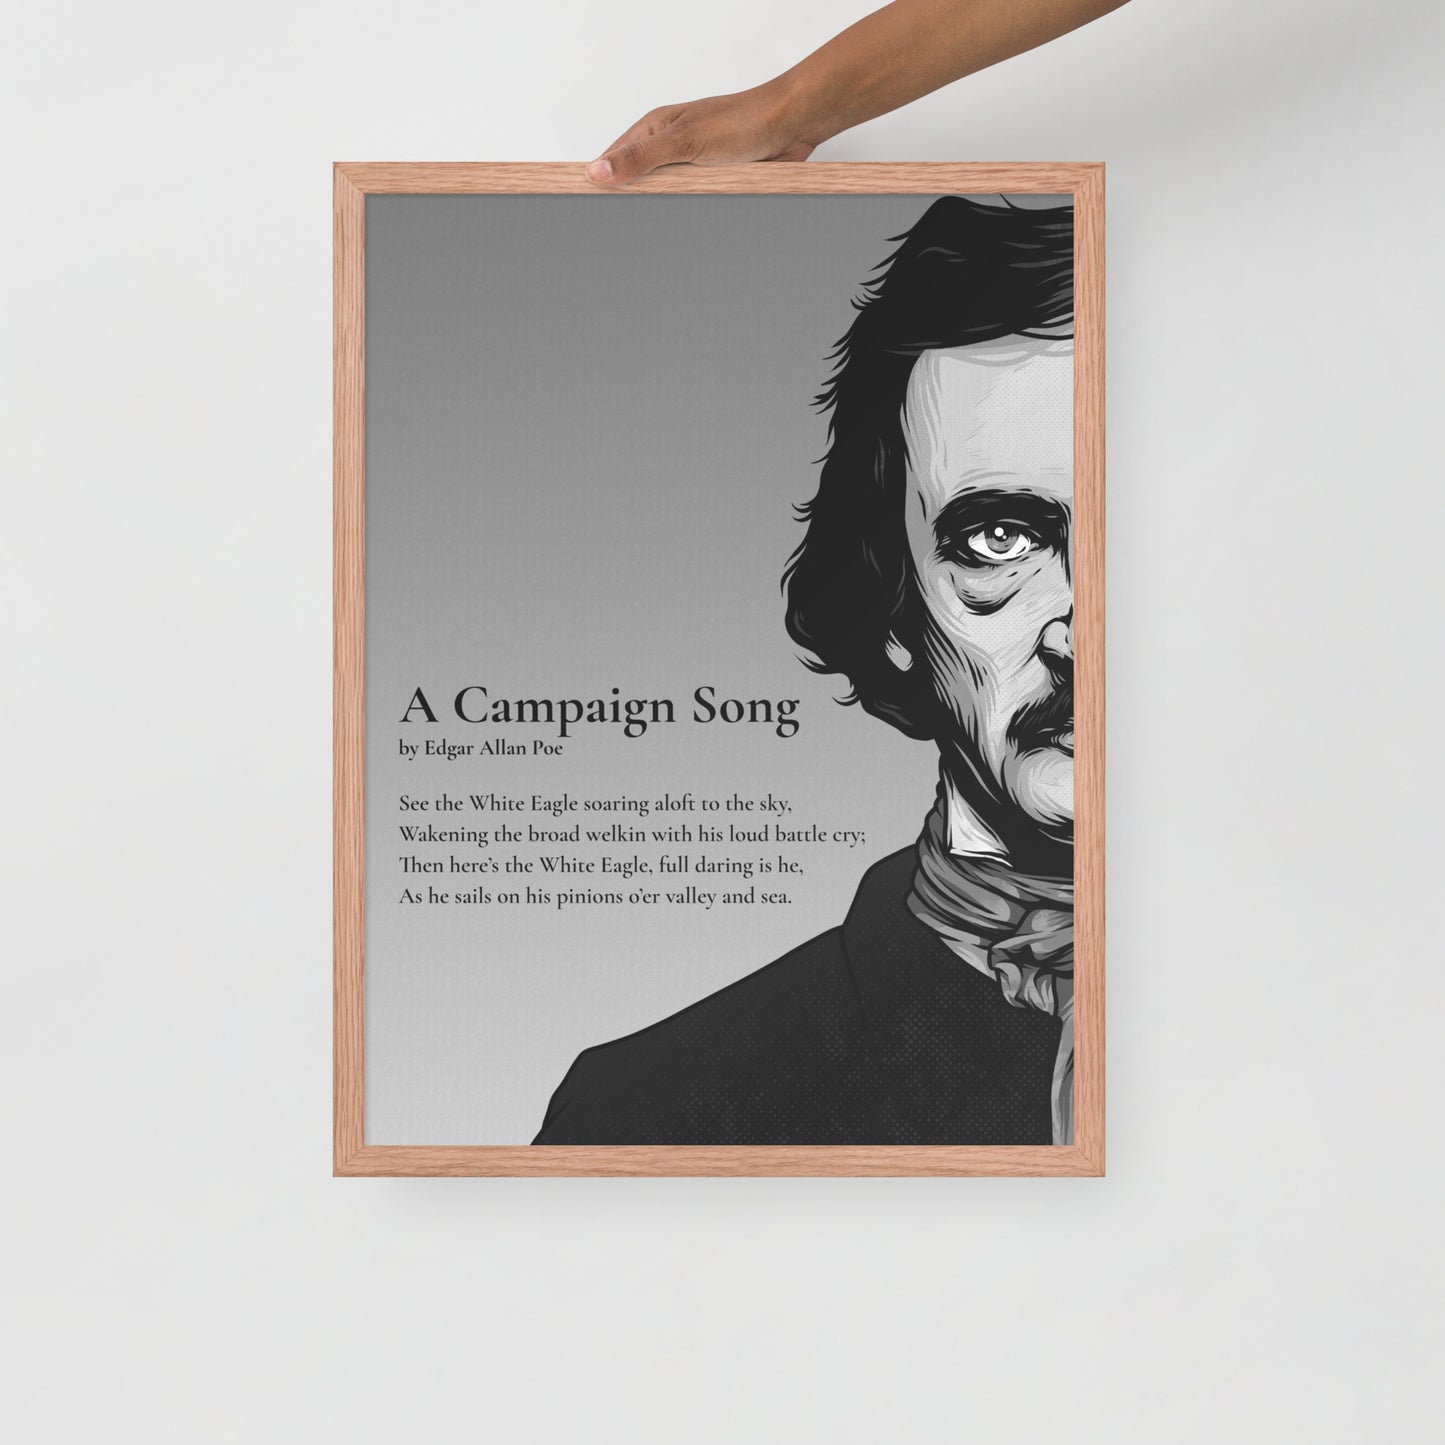 Edgar Allan Poe's 'A Campaign Song' Framed Matted Poster - 18 x 24 Red Oak Frame